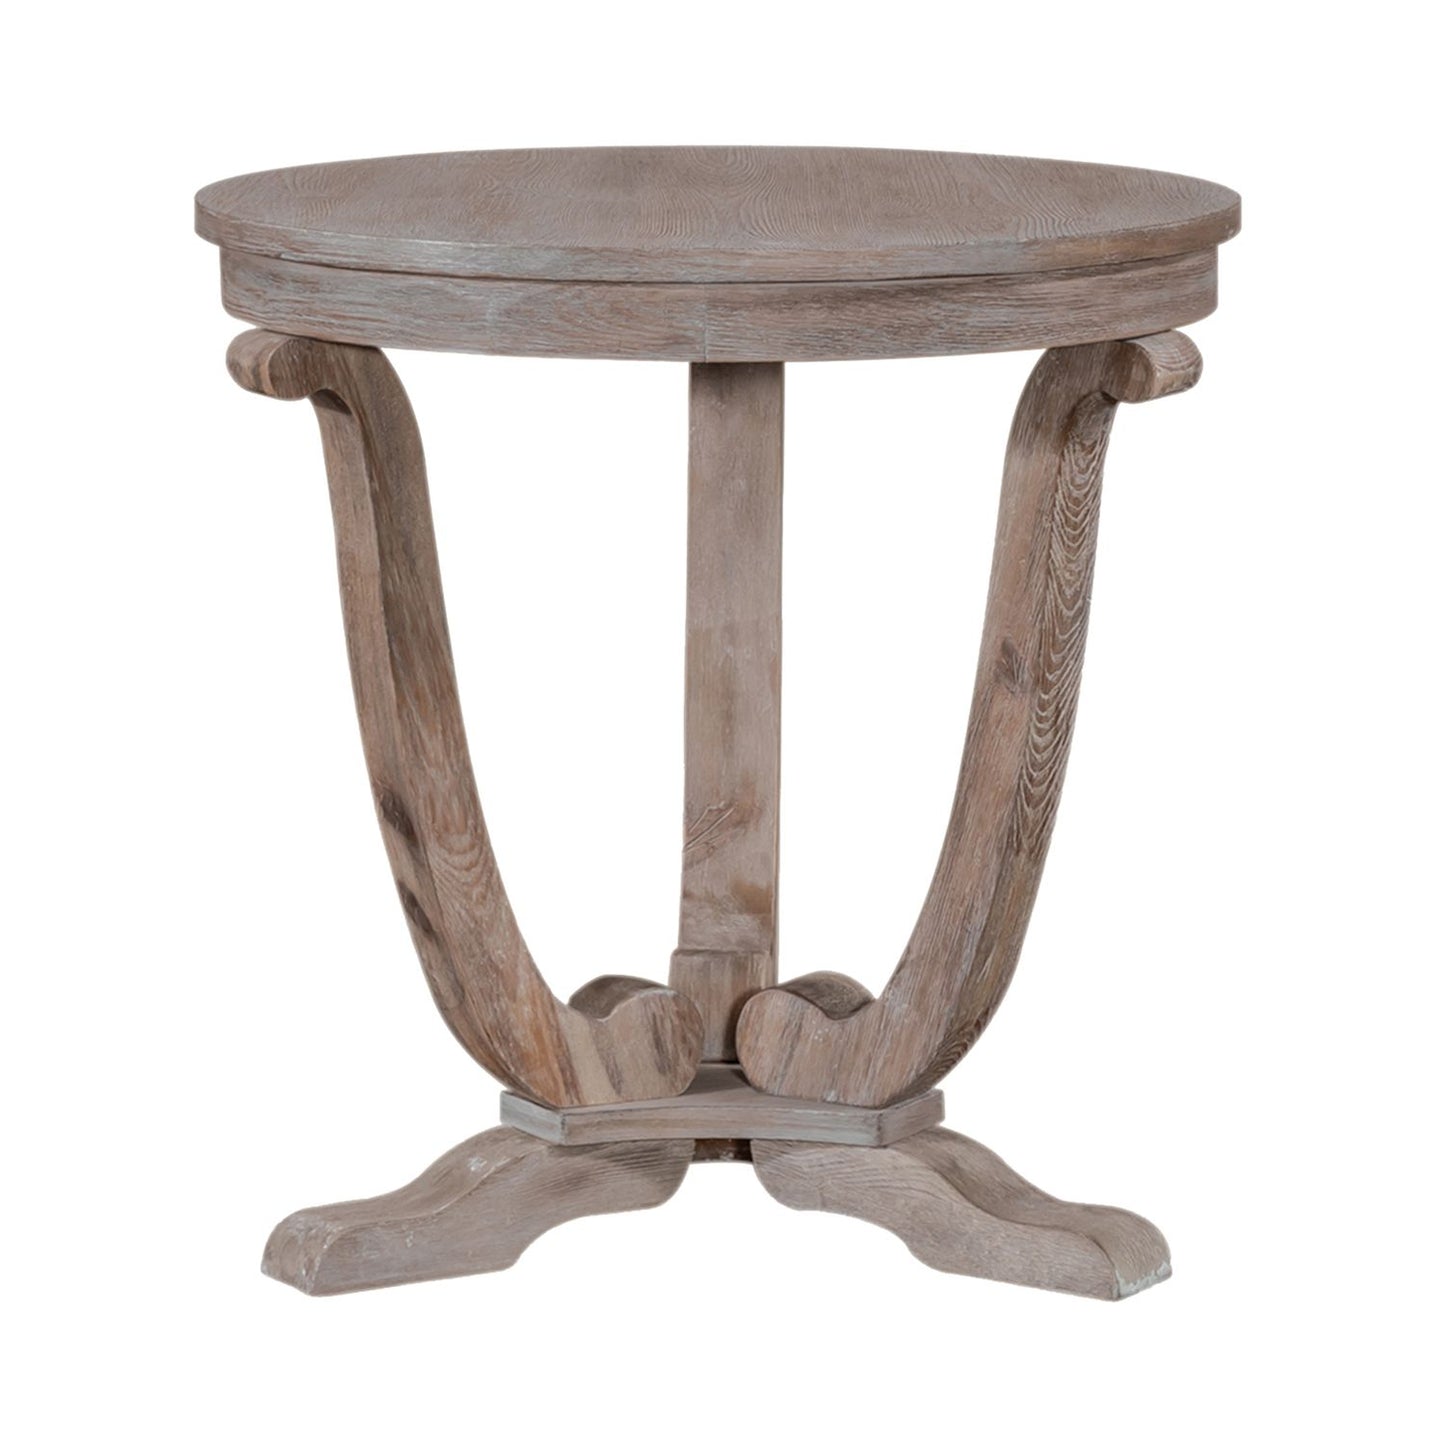 Greystone Mill - 3 Piece Set (1-Cocktail 2-End Tables)